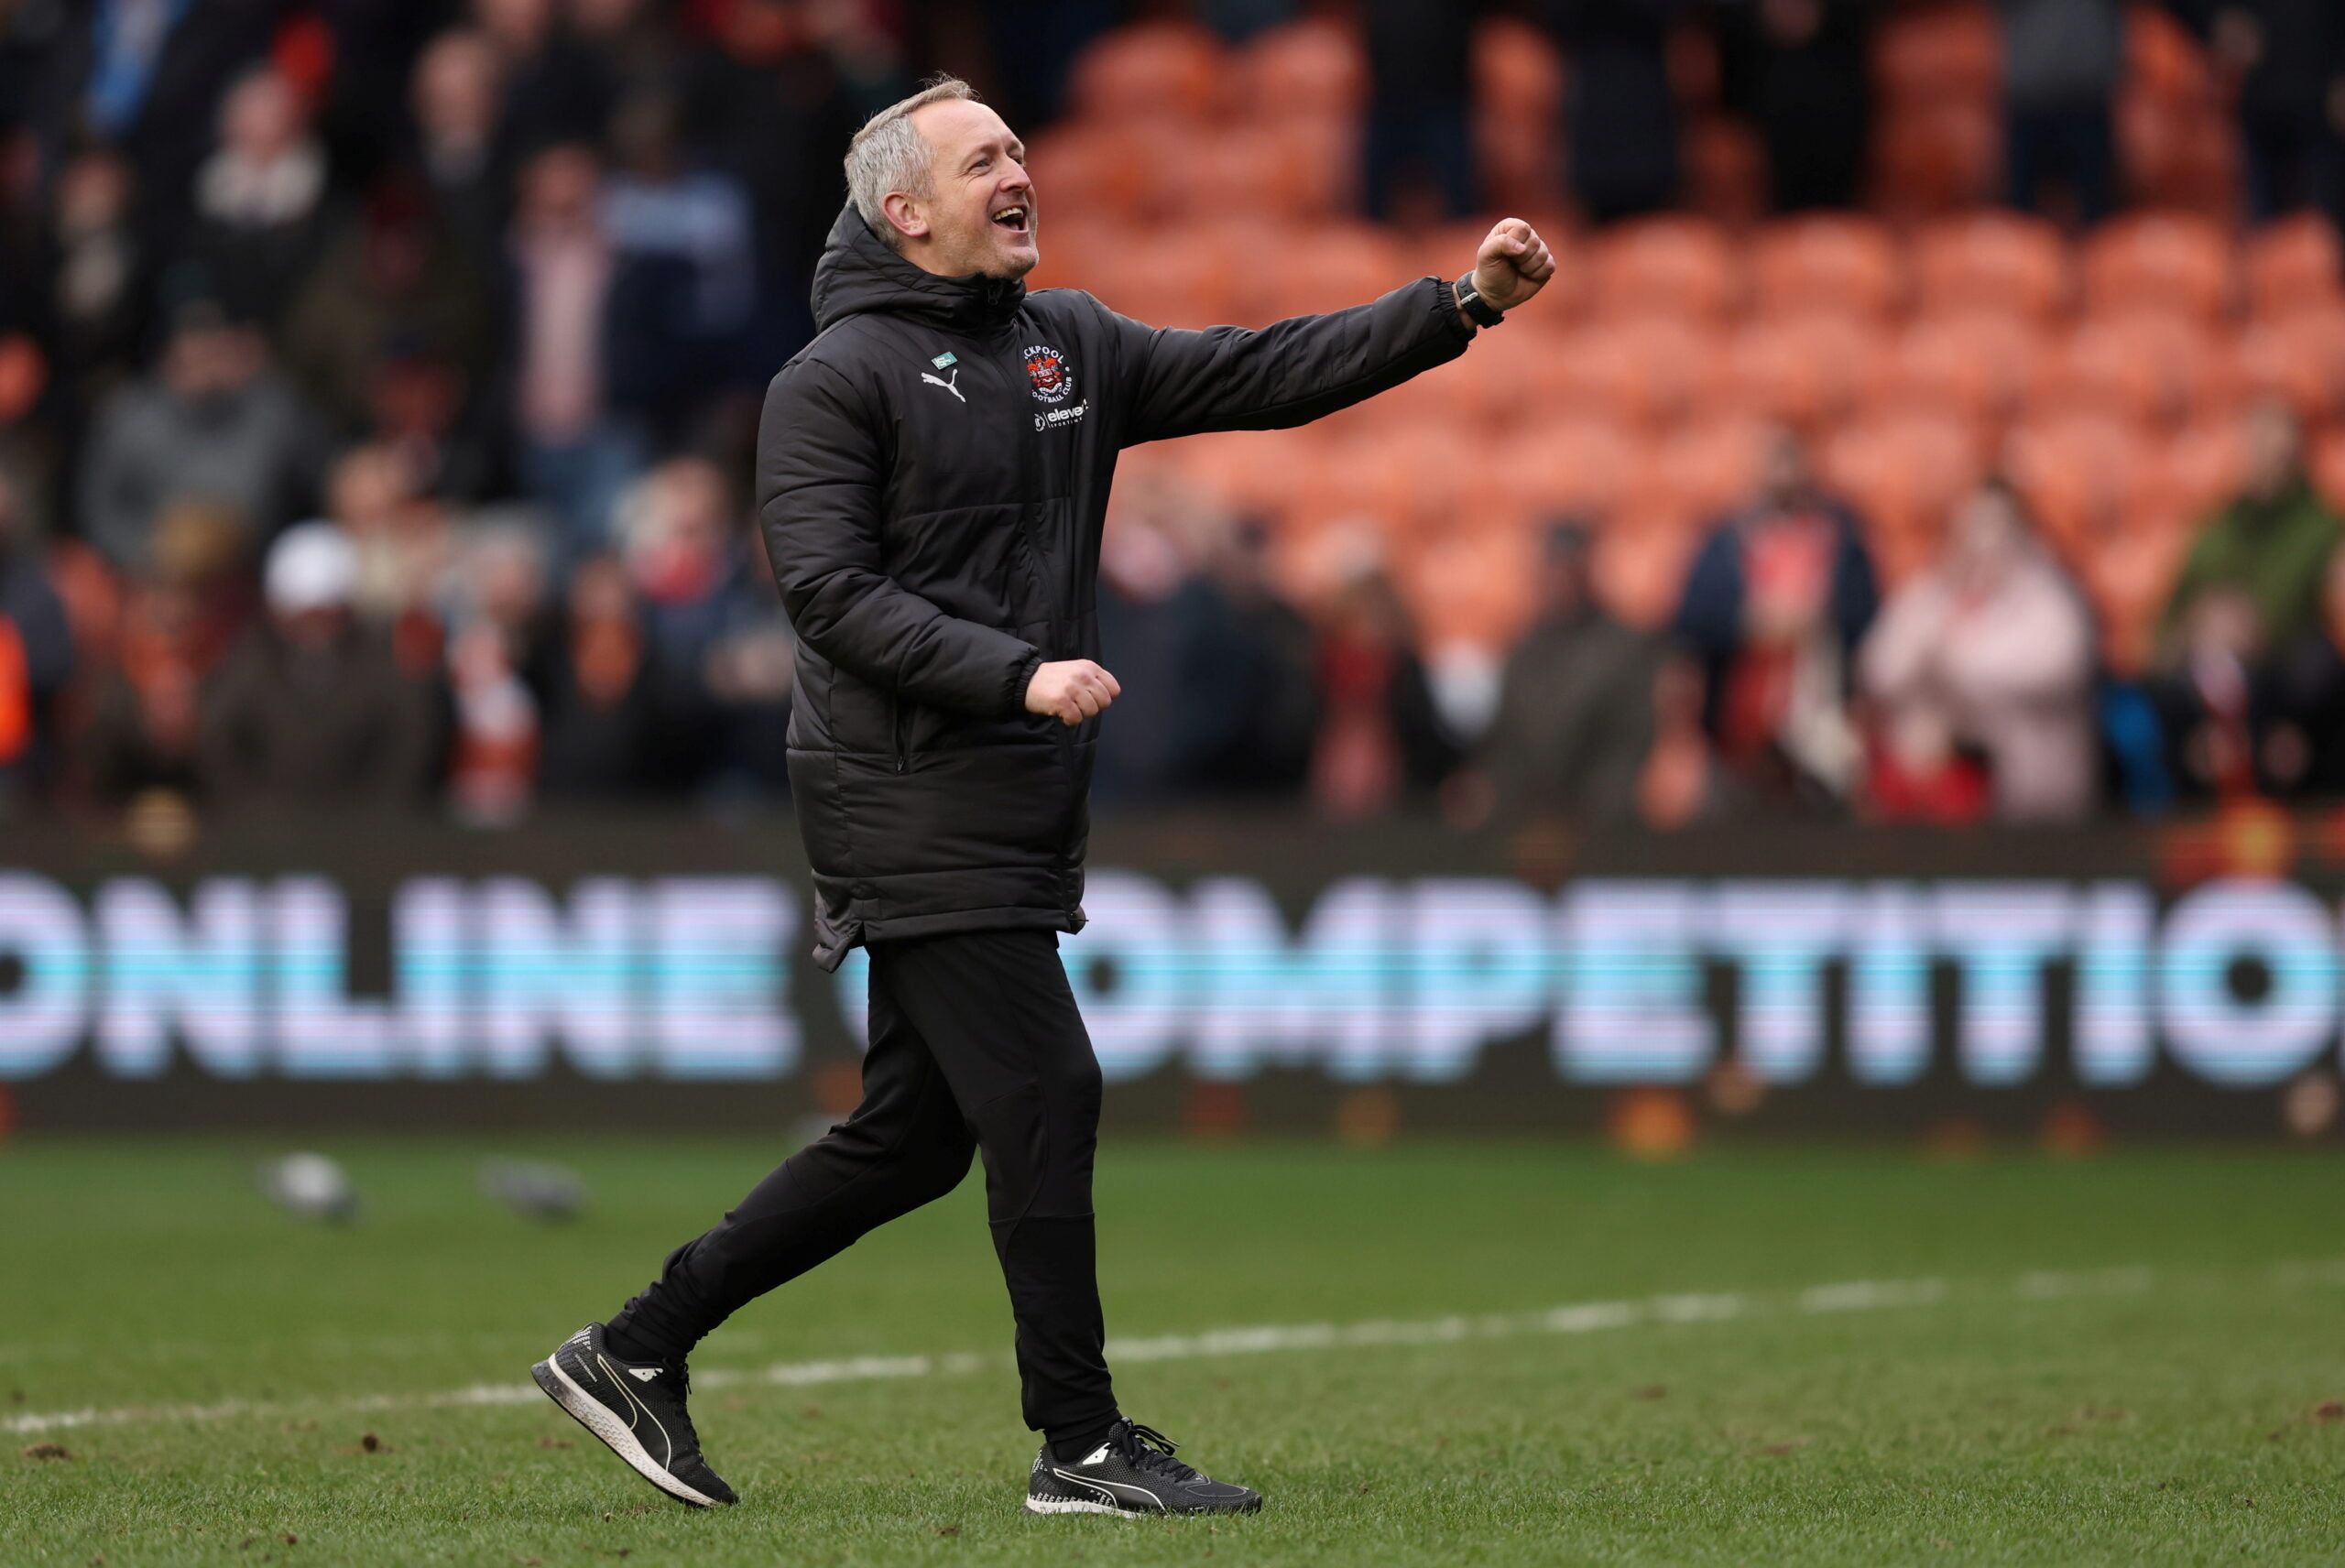 Soccer Football - Championship - Blackpool v Swansea City - Bloomfield Road, Blackpool , Britain - March 12, 2022  Blackpool manager Neil Critchley celebrates after the match   Action Images/John Clifton  EDITORIAL USE ONLY. No use with unauthorized audio, video, data, fixture lists, club/league logos or 